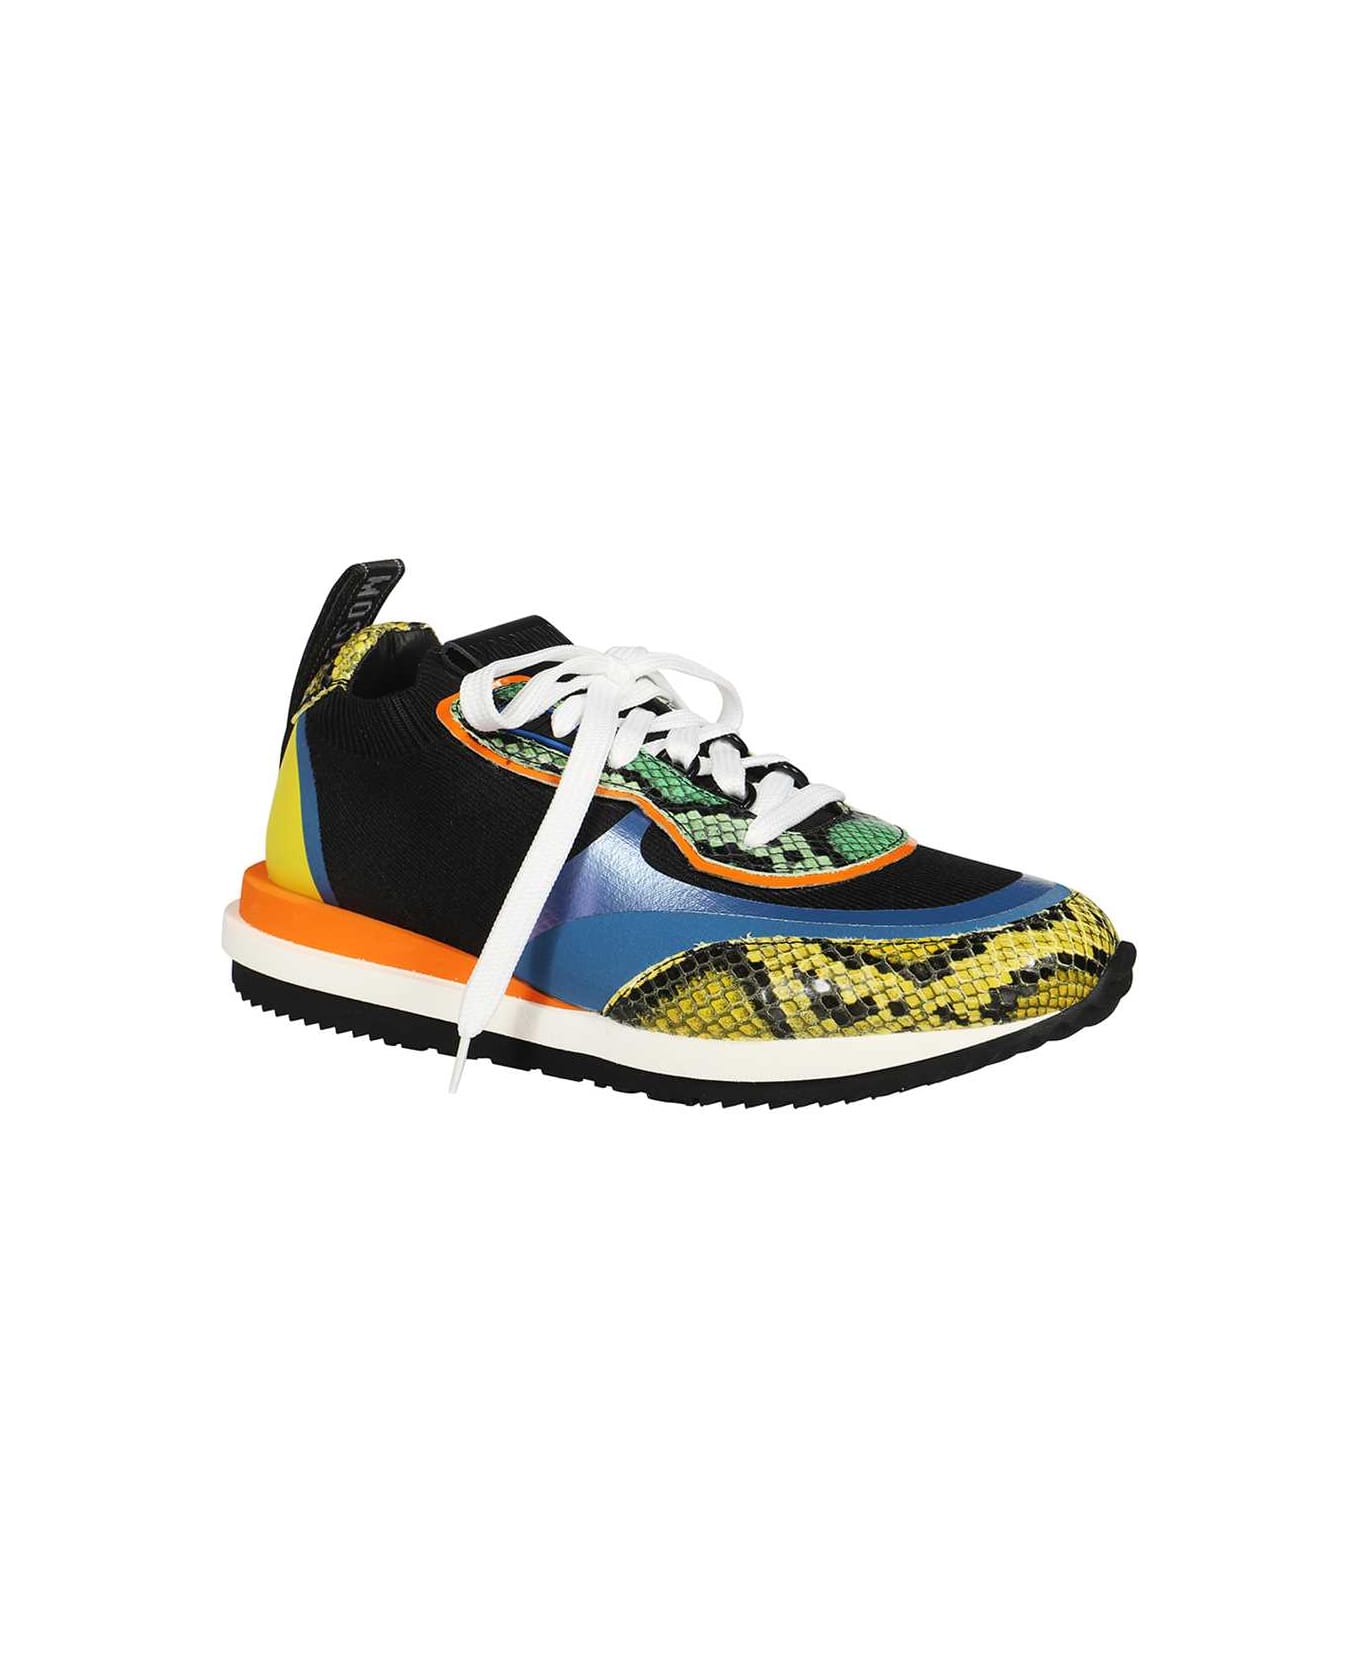 Moschino Low-top Sneakers - Multicolor